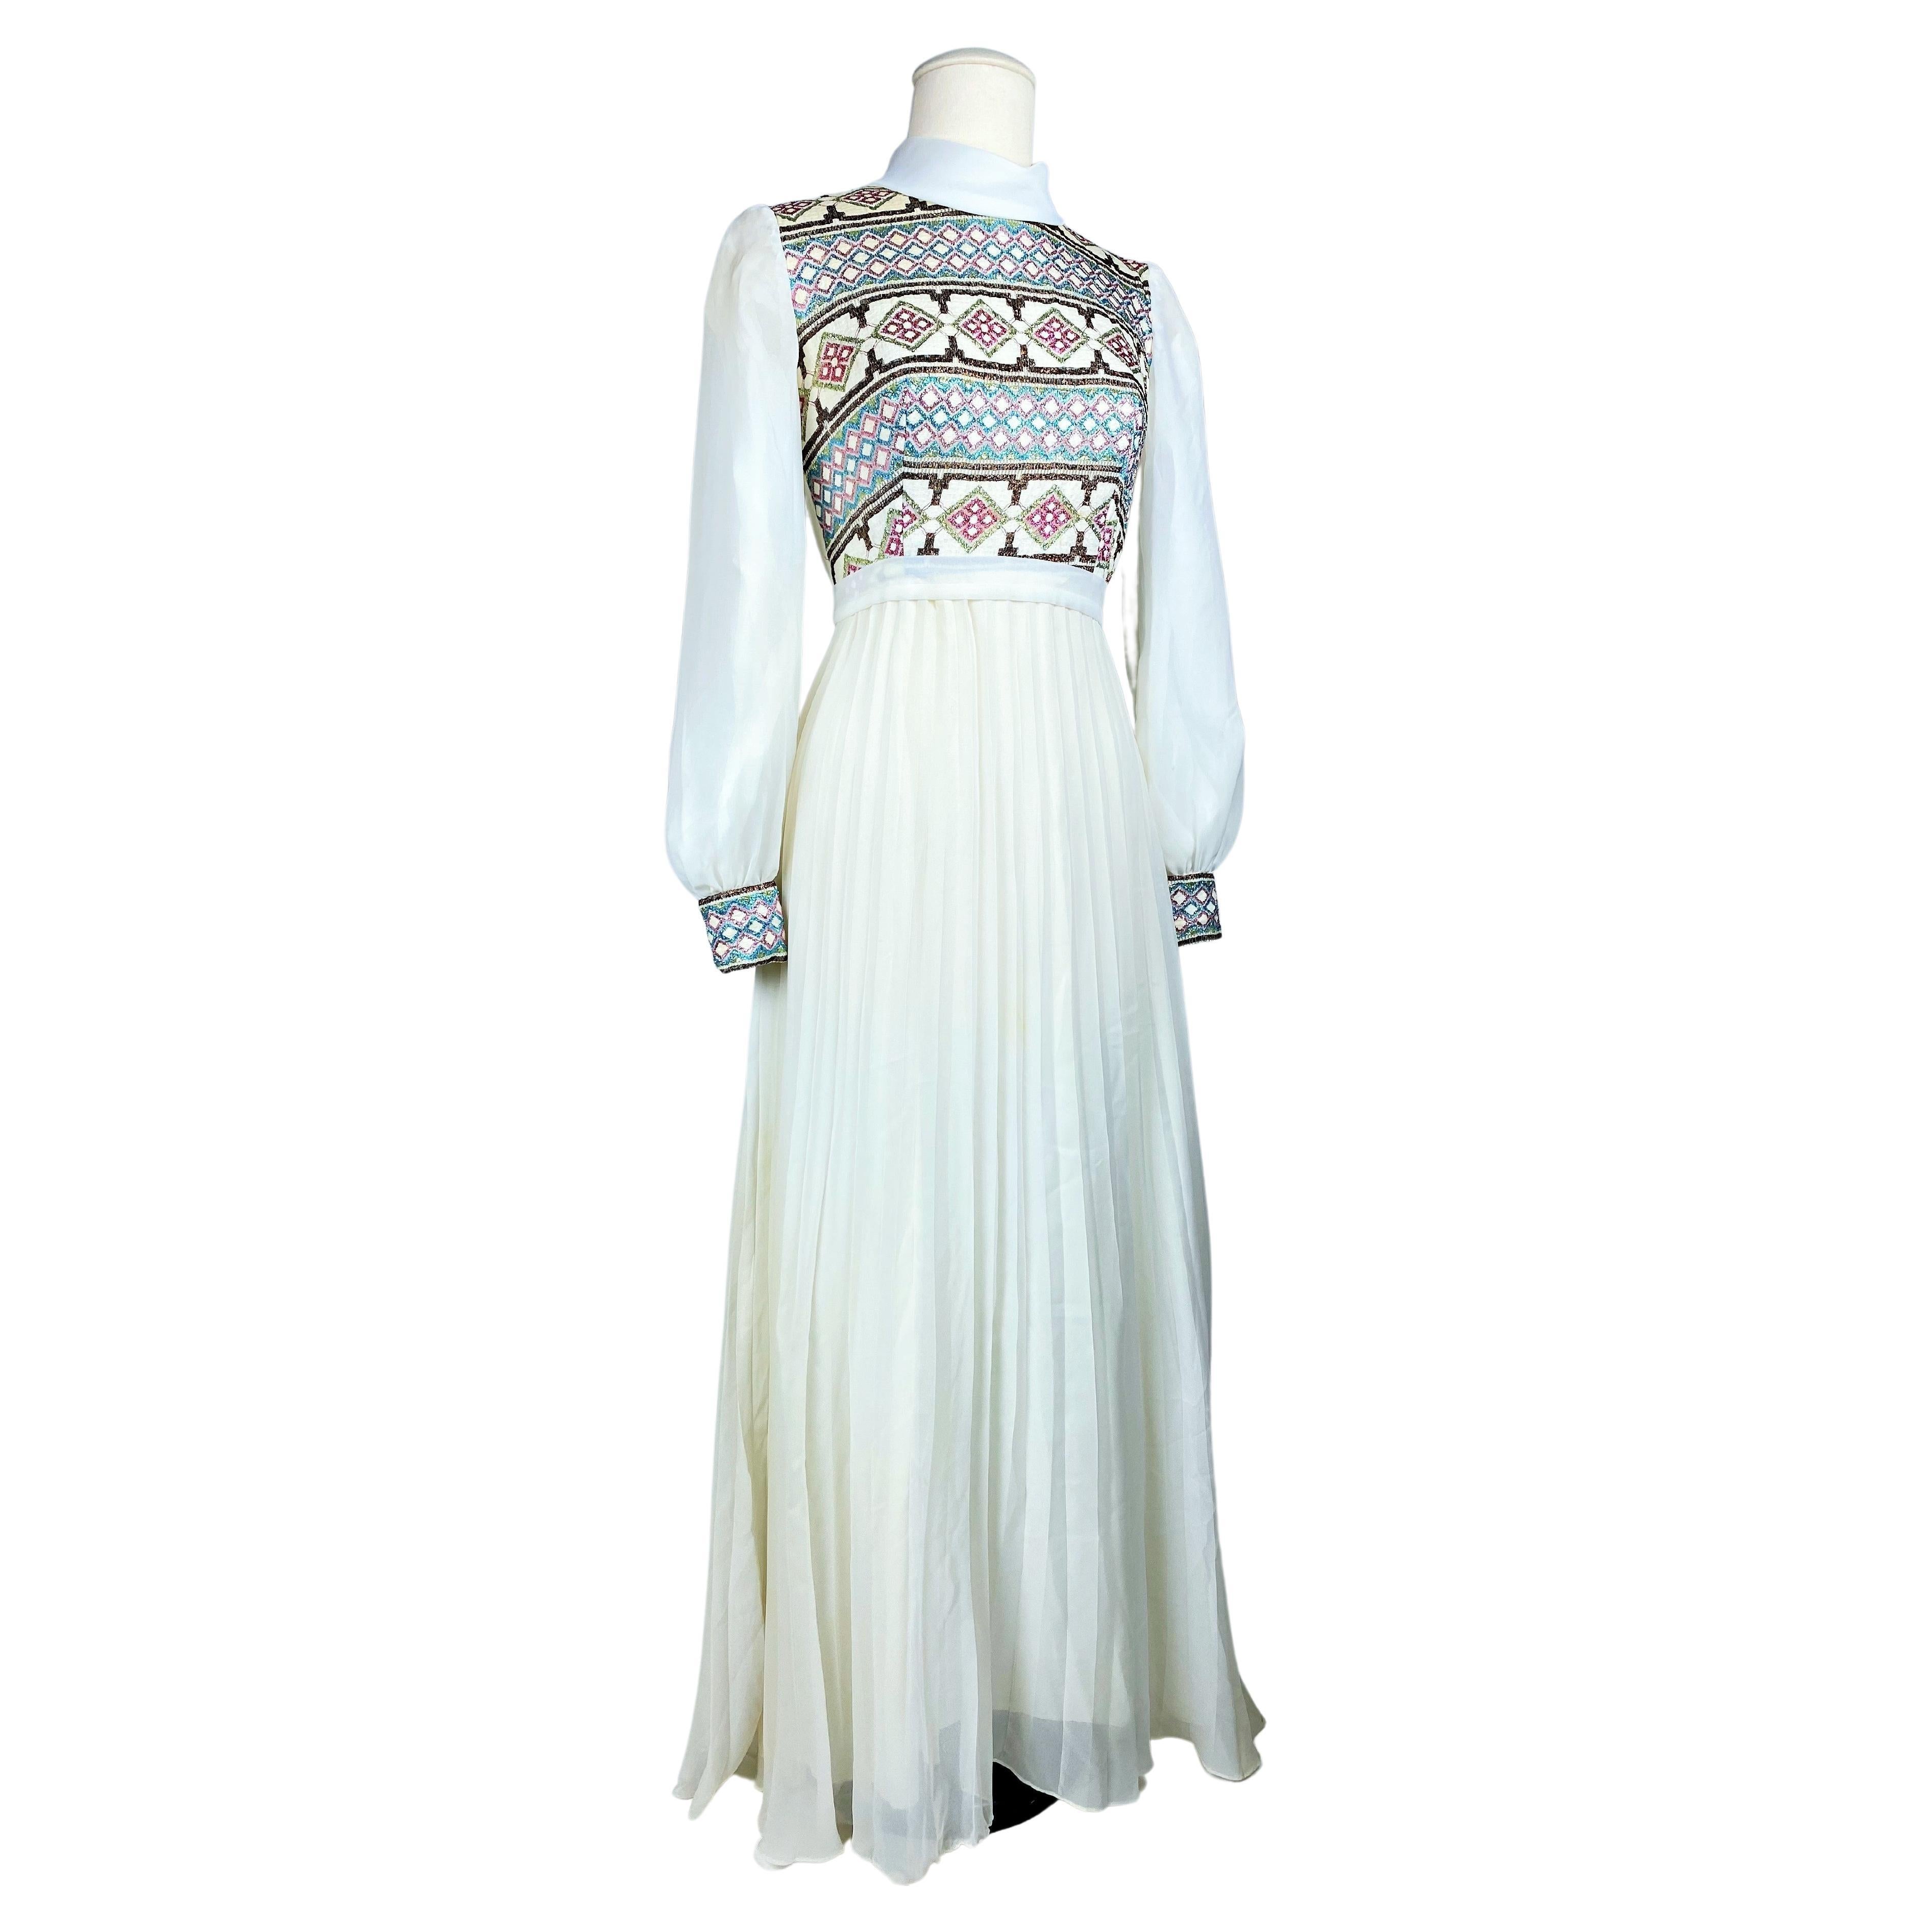 Nylon and lurex crepe formal dress - France Circa 1972 For Sale